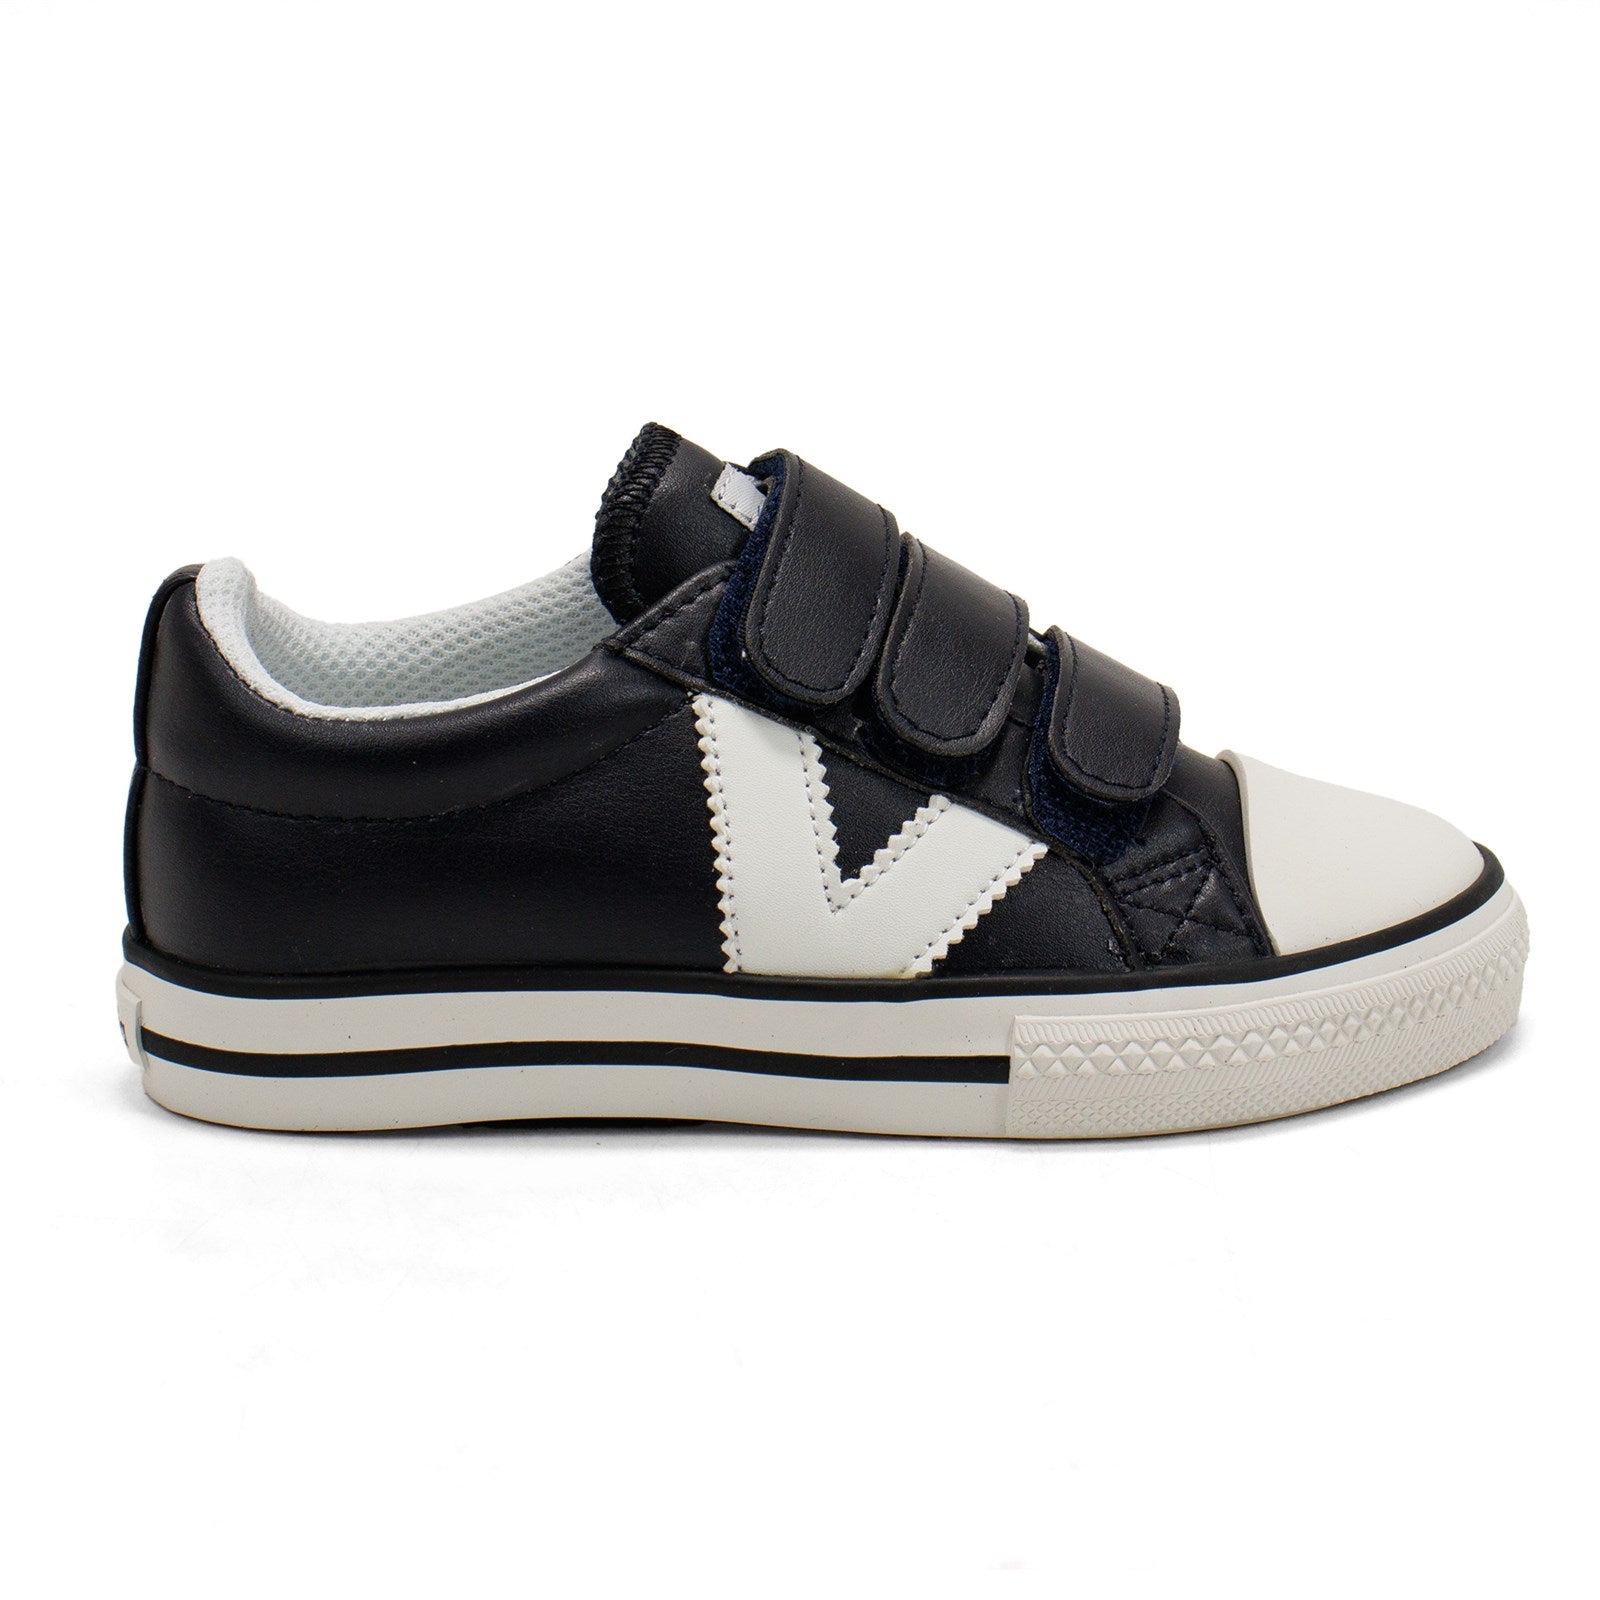 Victoria Toddler Tribu Contrast Faux Leather Straps Sneaker